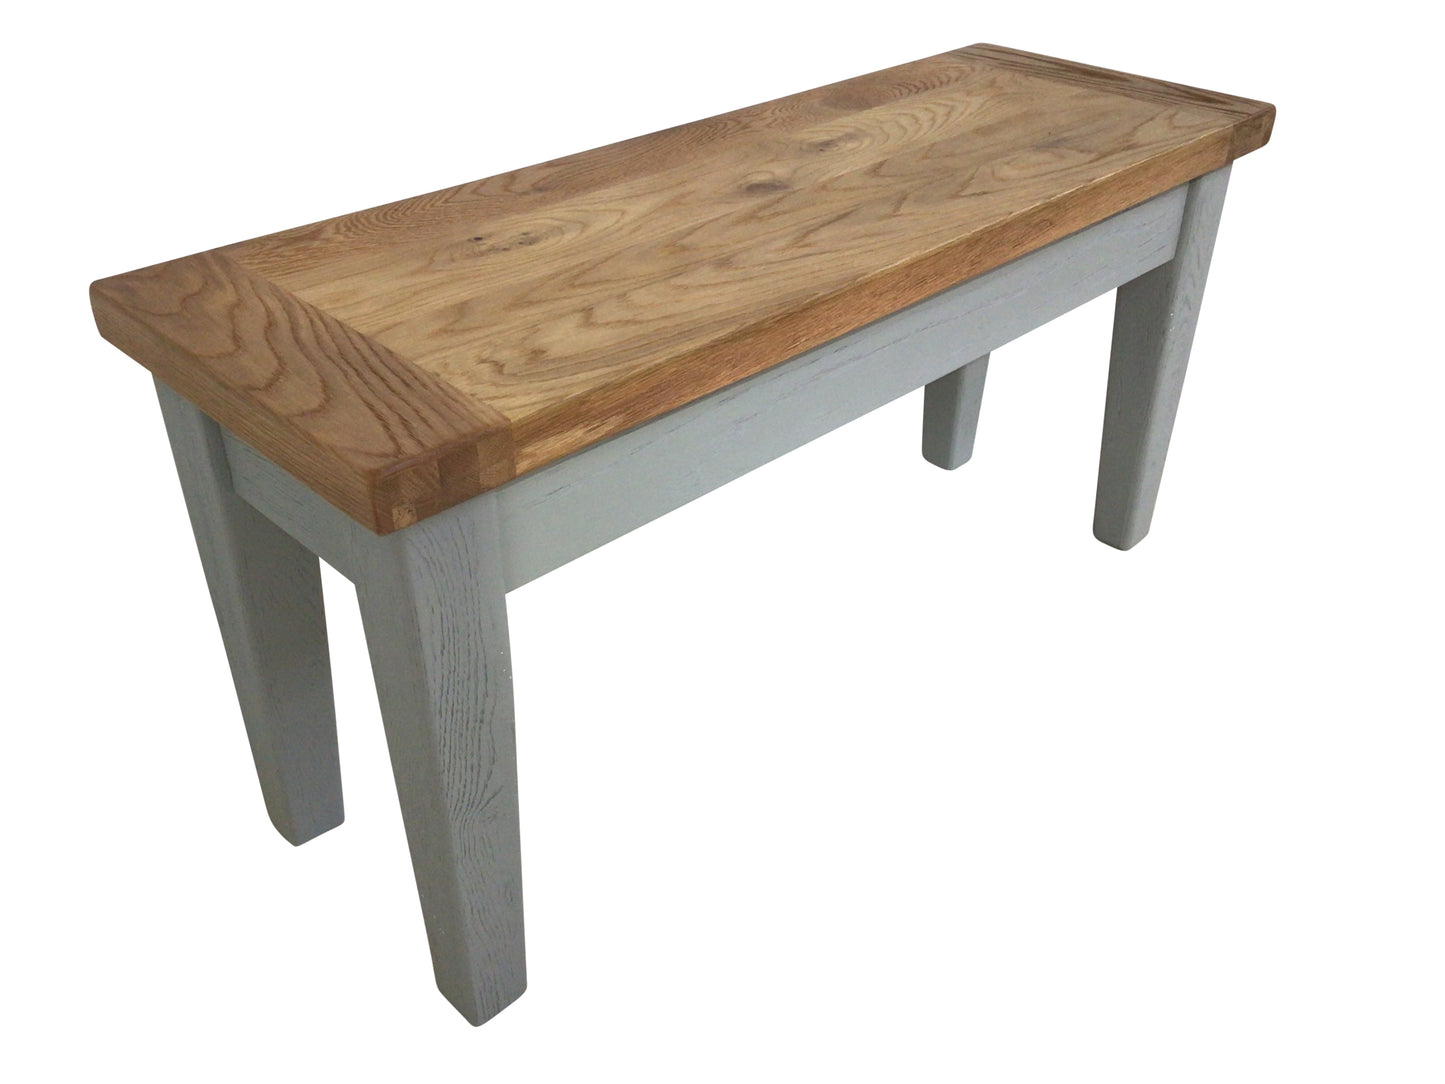 Calgary Oak 1m Bench painted French Grey